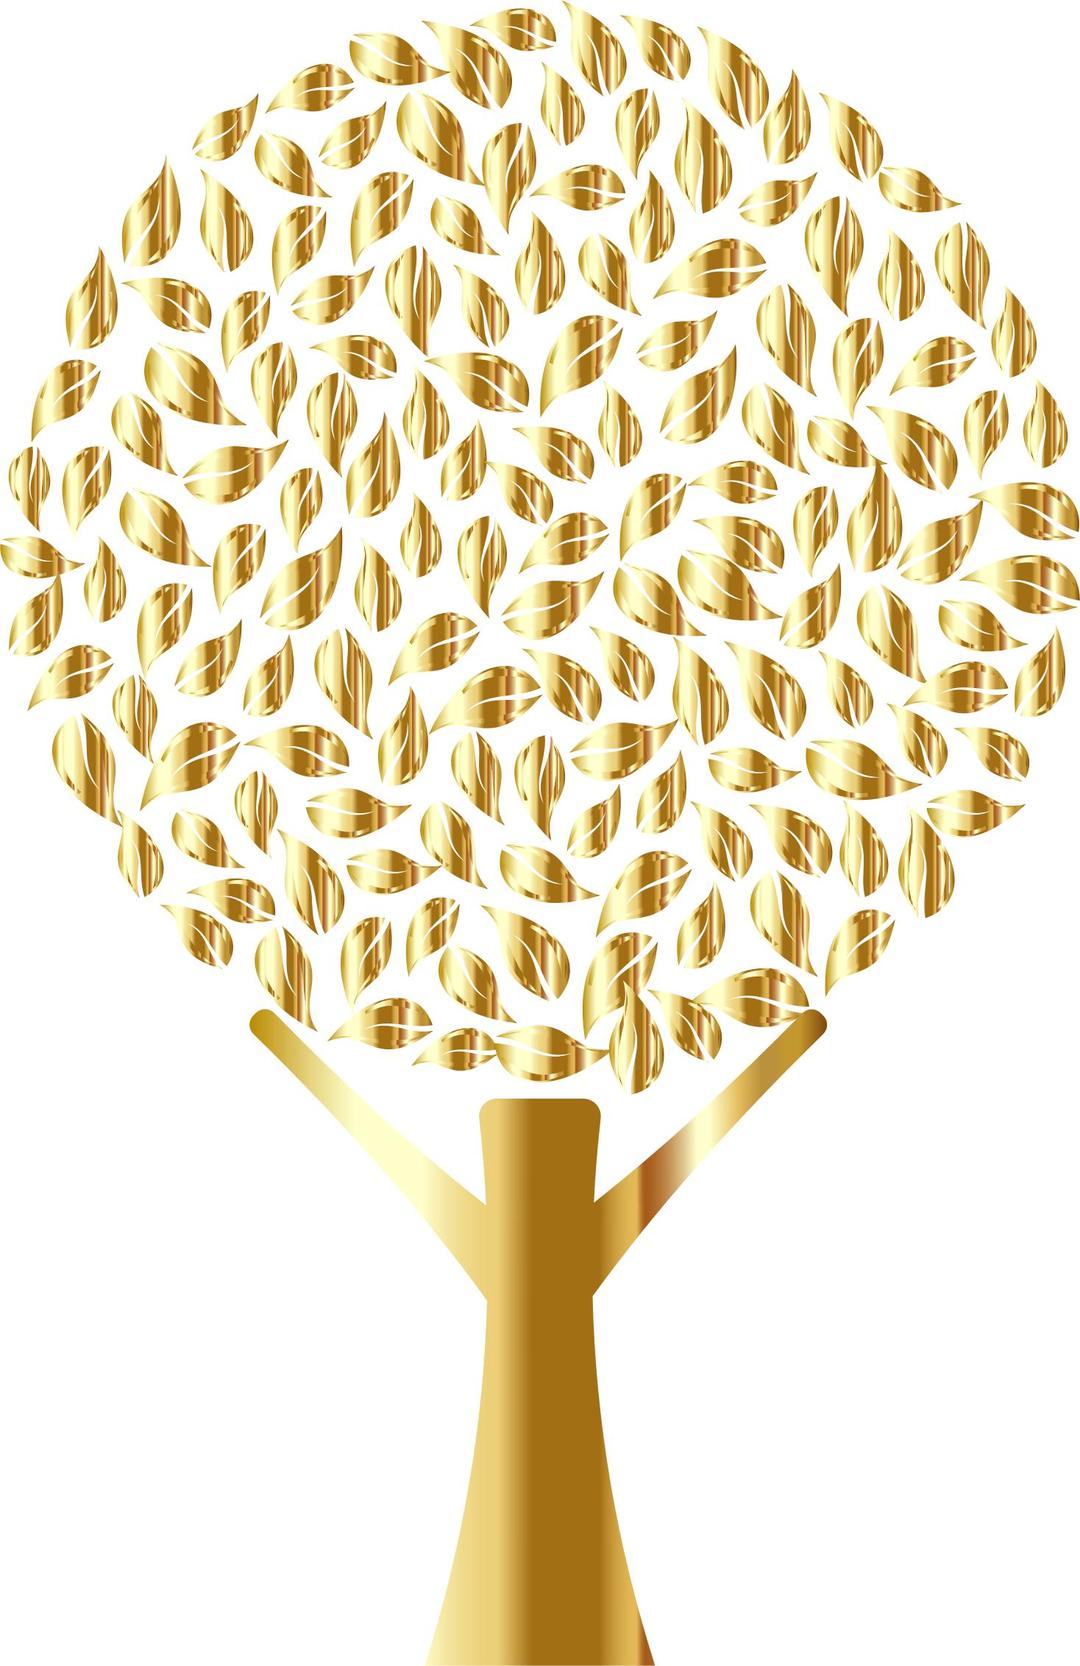 Golden Abstract Tree No Background png transparent